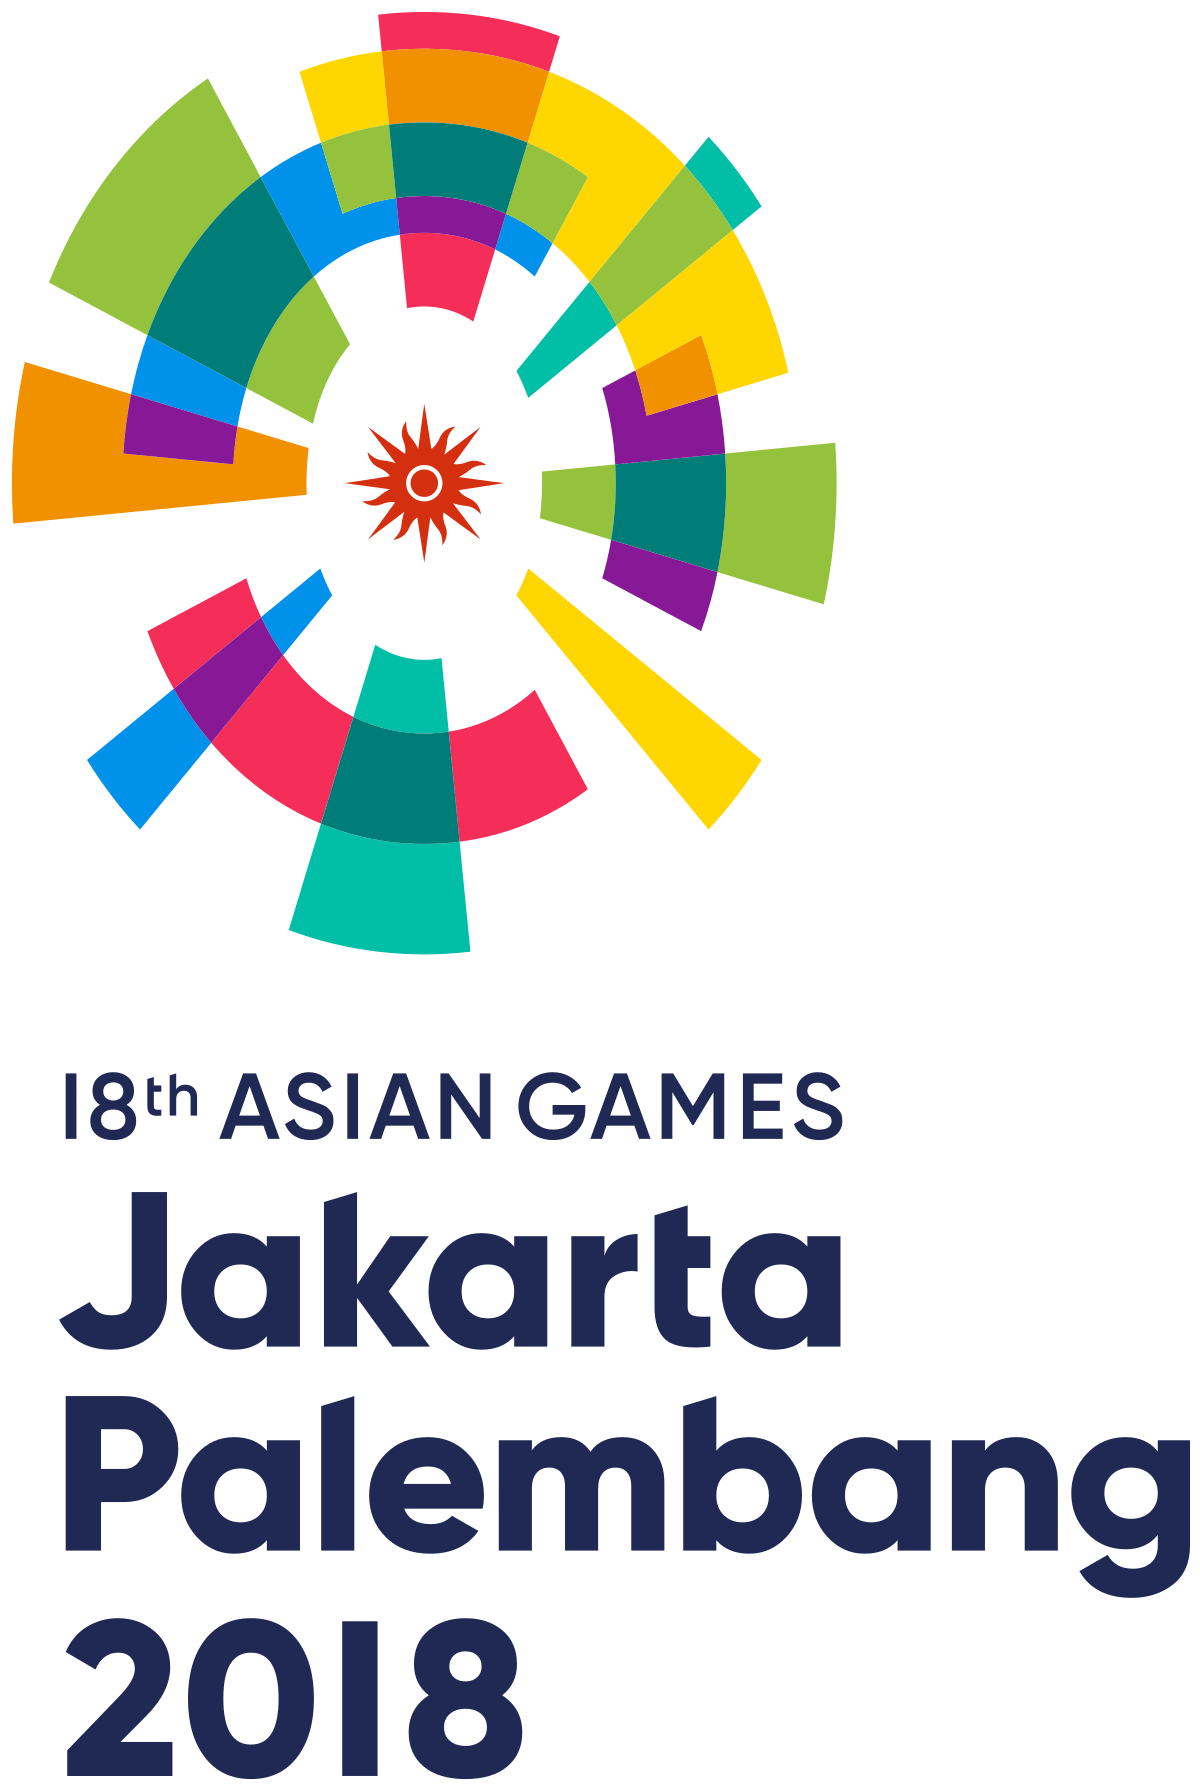 Asian Starts with S Logo - 2018 Asian Games